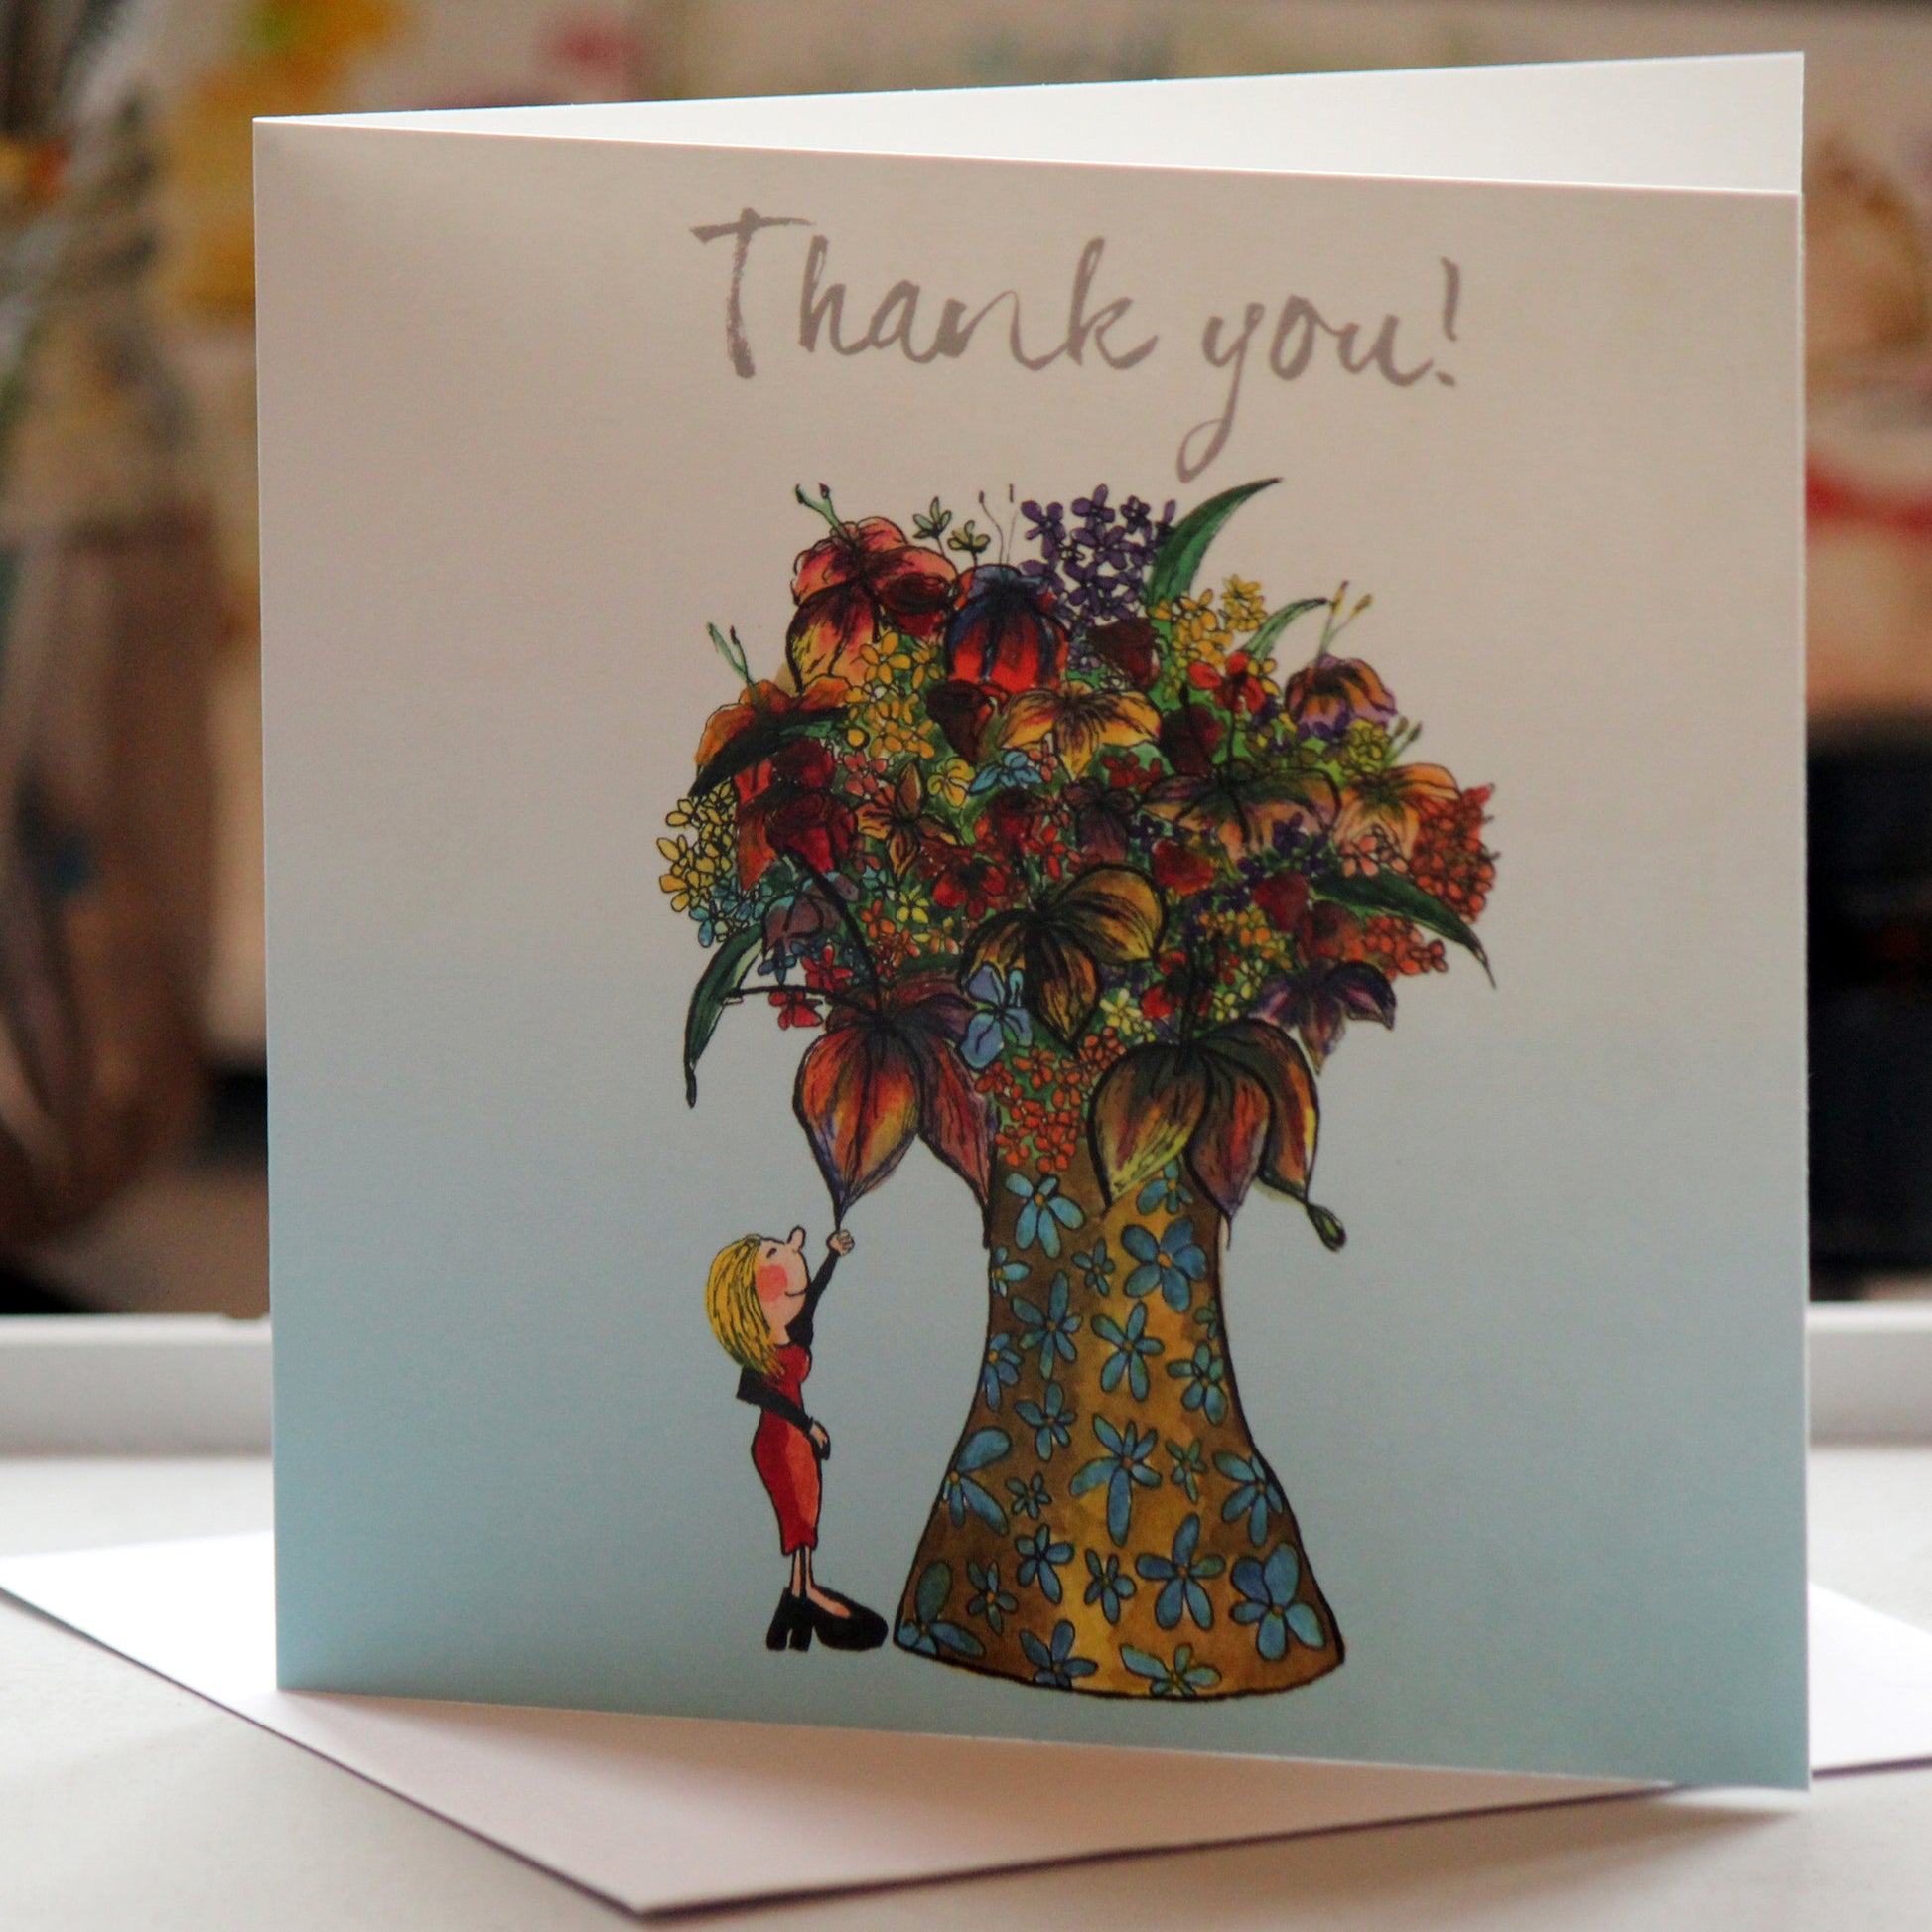 "Thank you flowers"- Greeting Card - damedoodah.com  - Art and Design by Katie Rudge 